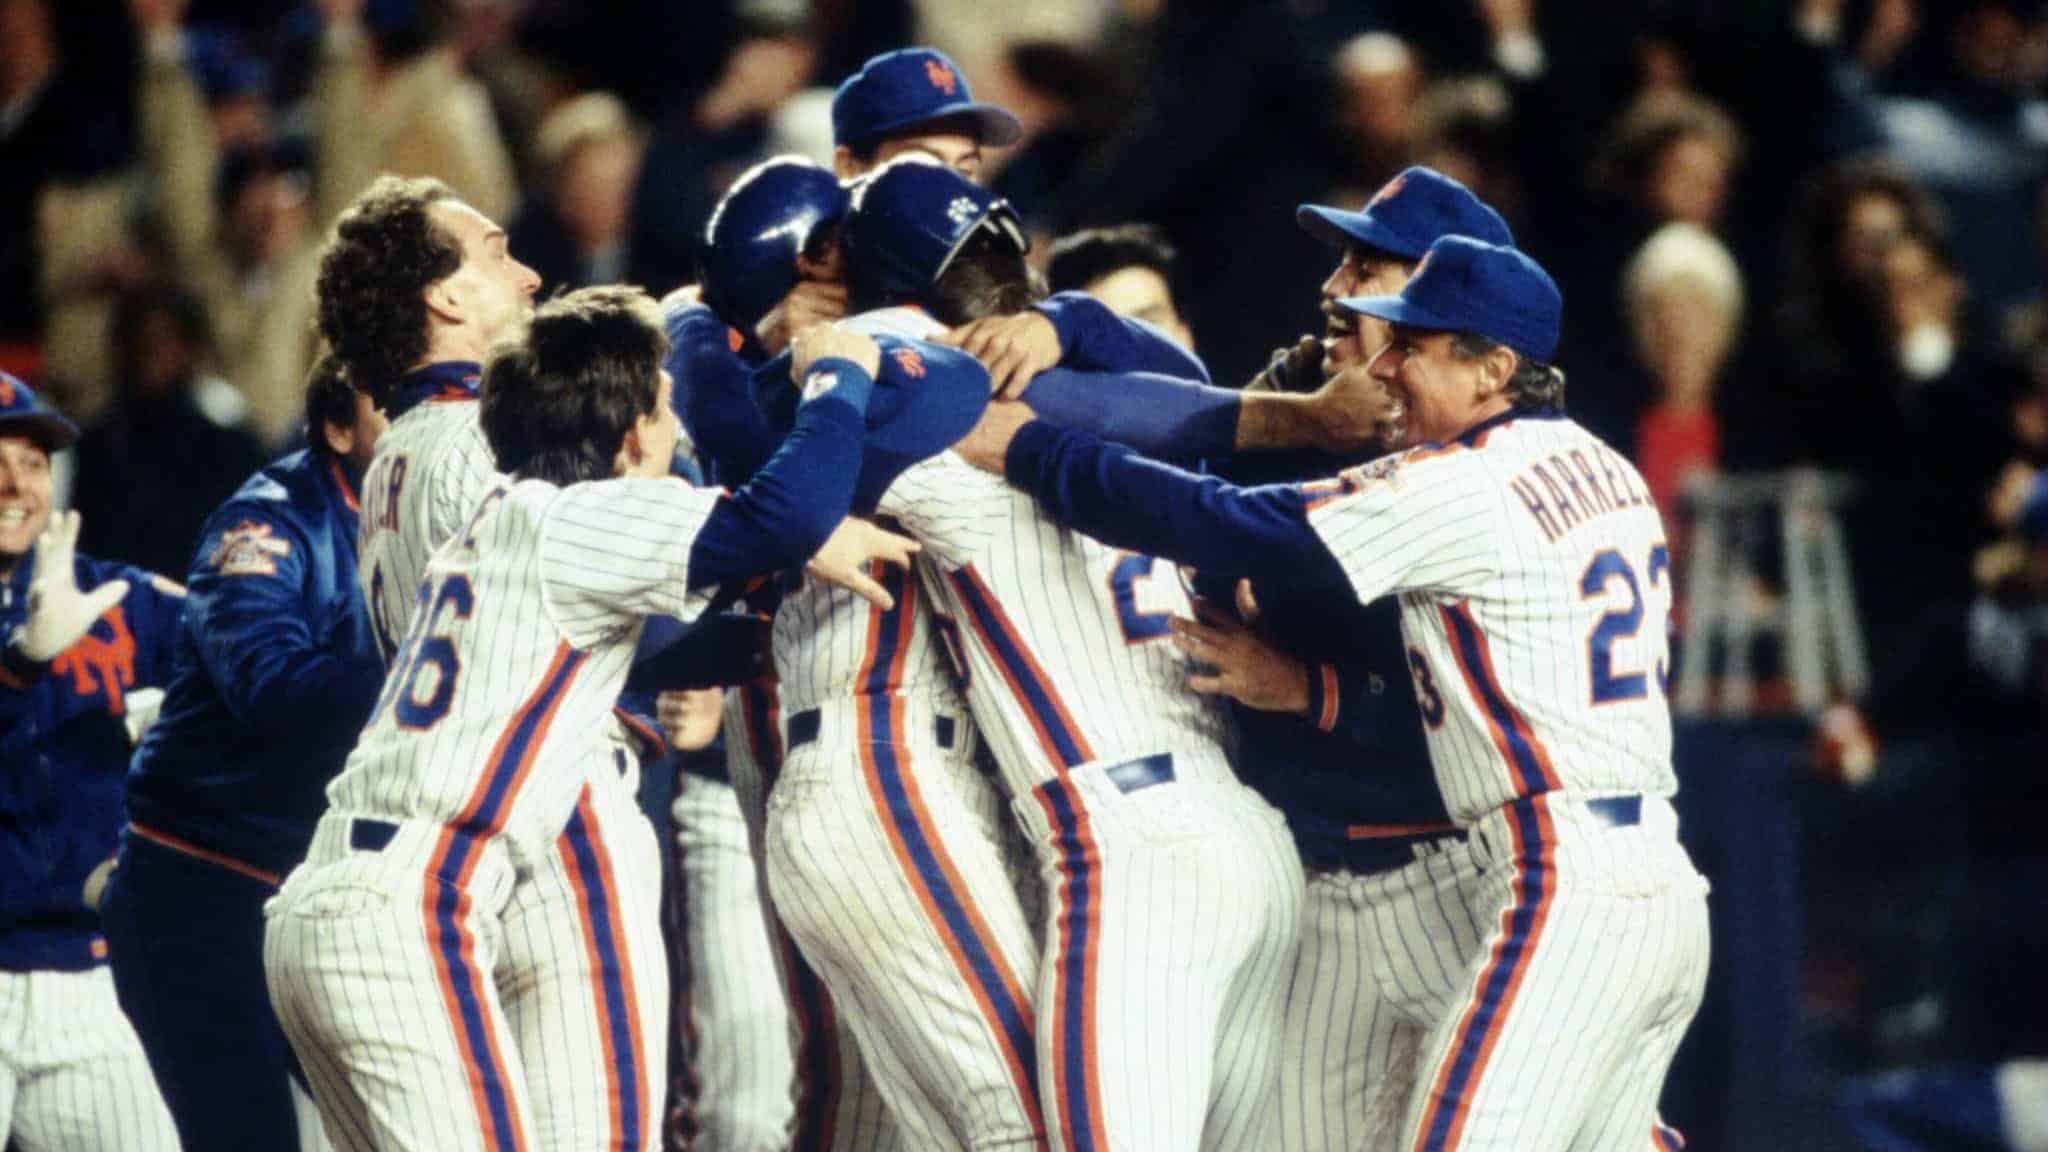 OCT 1986: THE NEW YORK METS CELEBRATE DURING THE METS 4-3 WIN OVER THE BOSTON RED SOX IN GAME 6 OF THE WORLD SERIES AT SHEA STADIUM IN NEW YORK, NEW YORK.